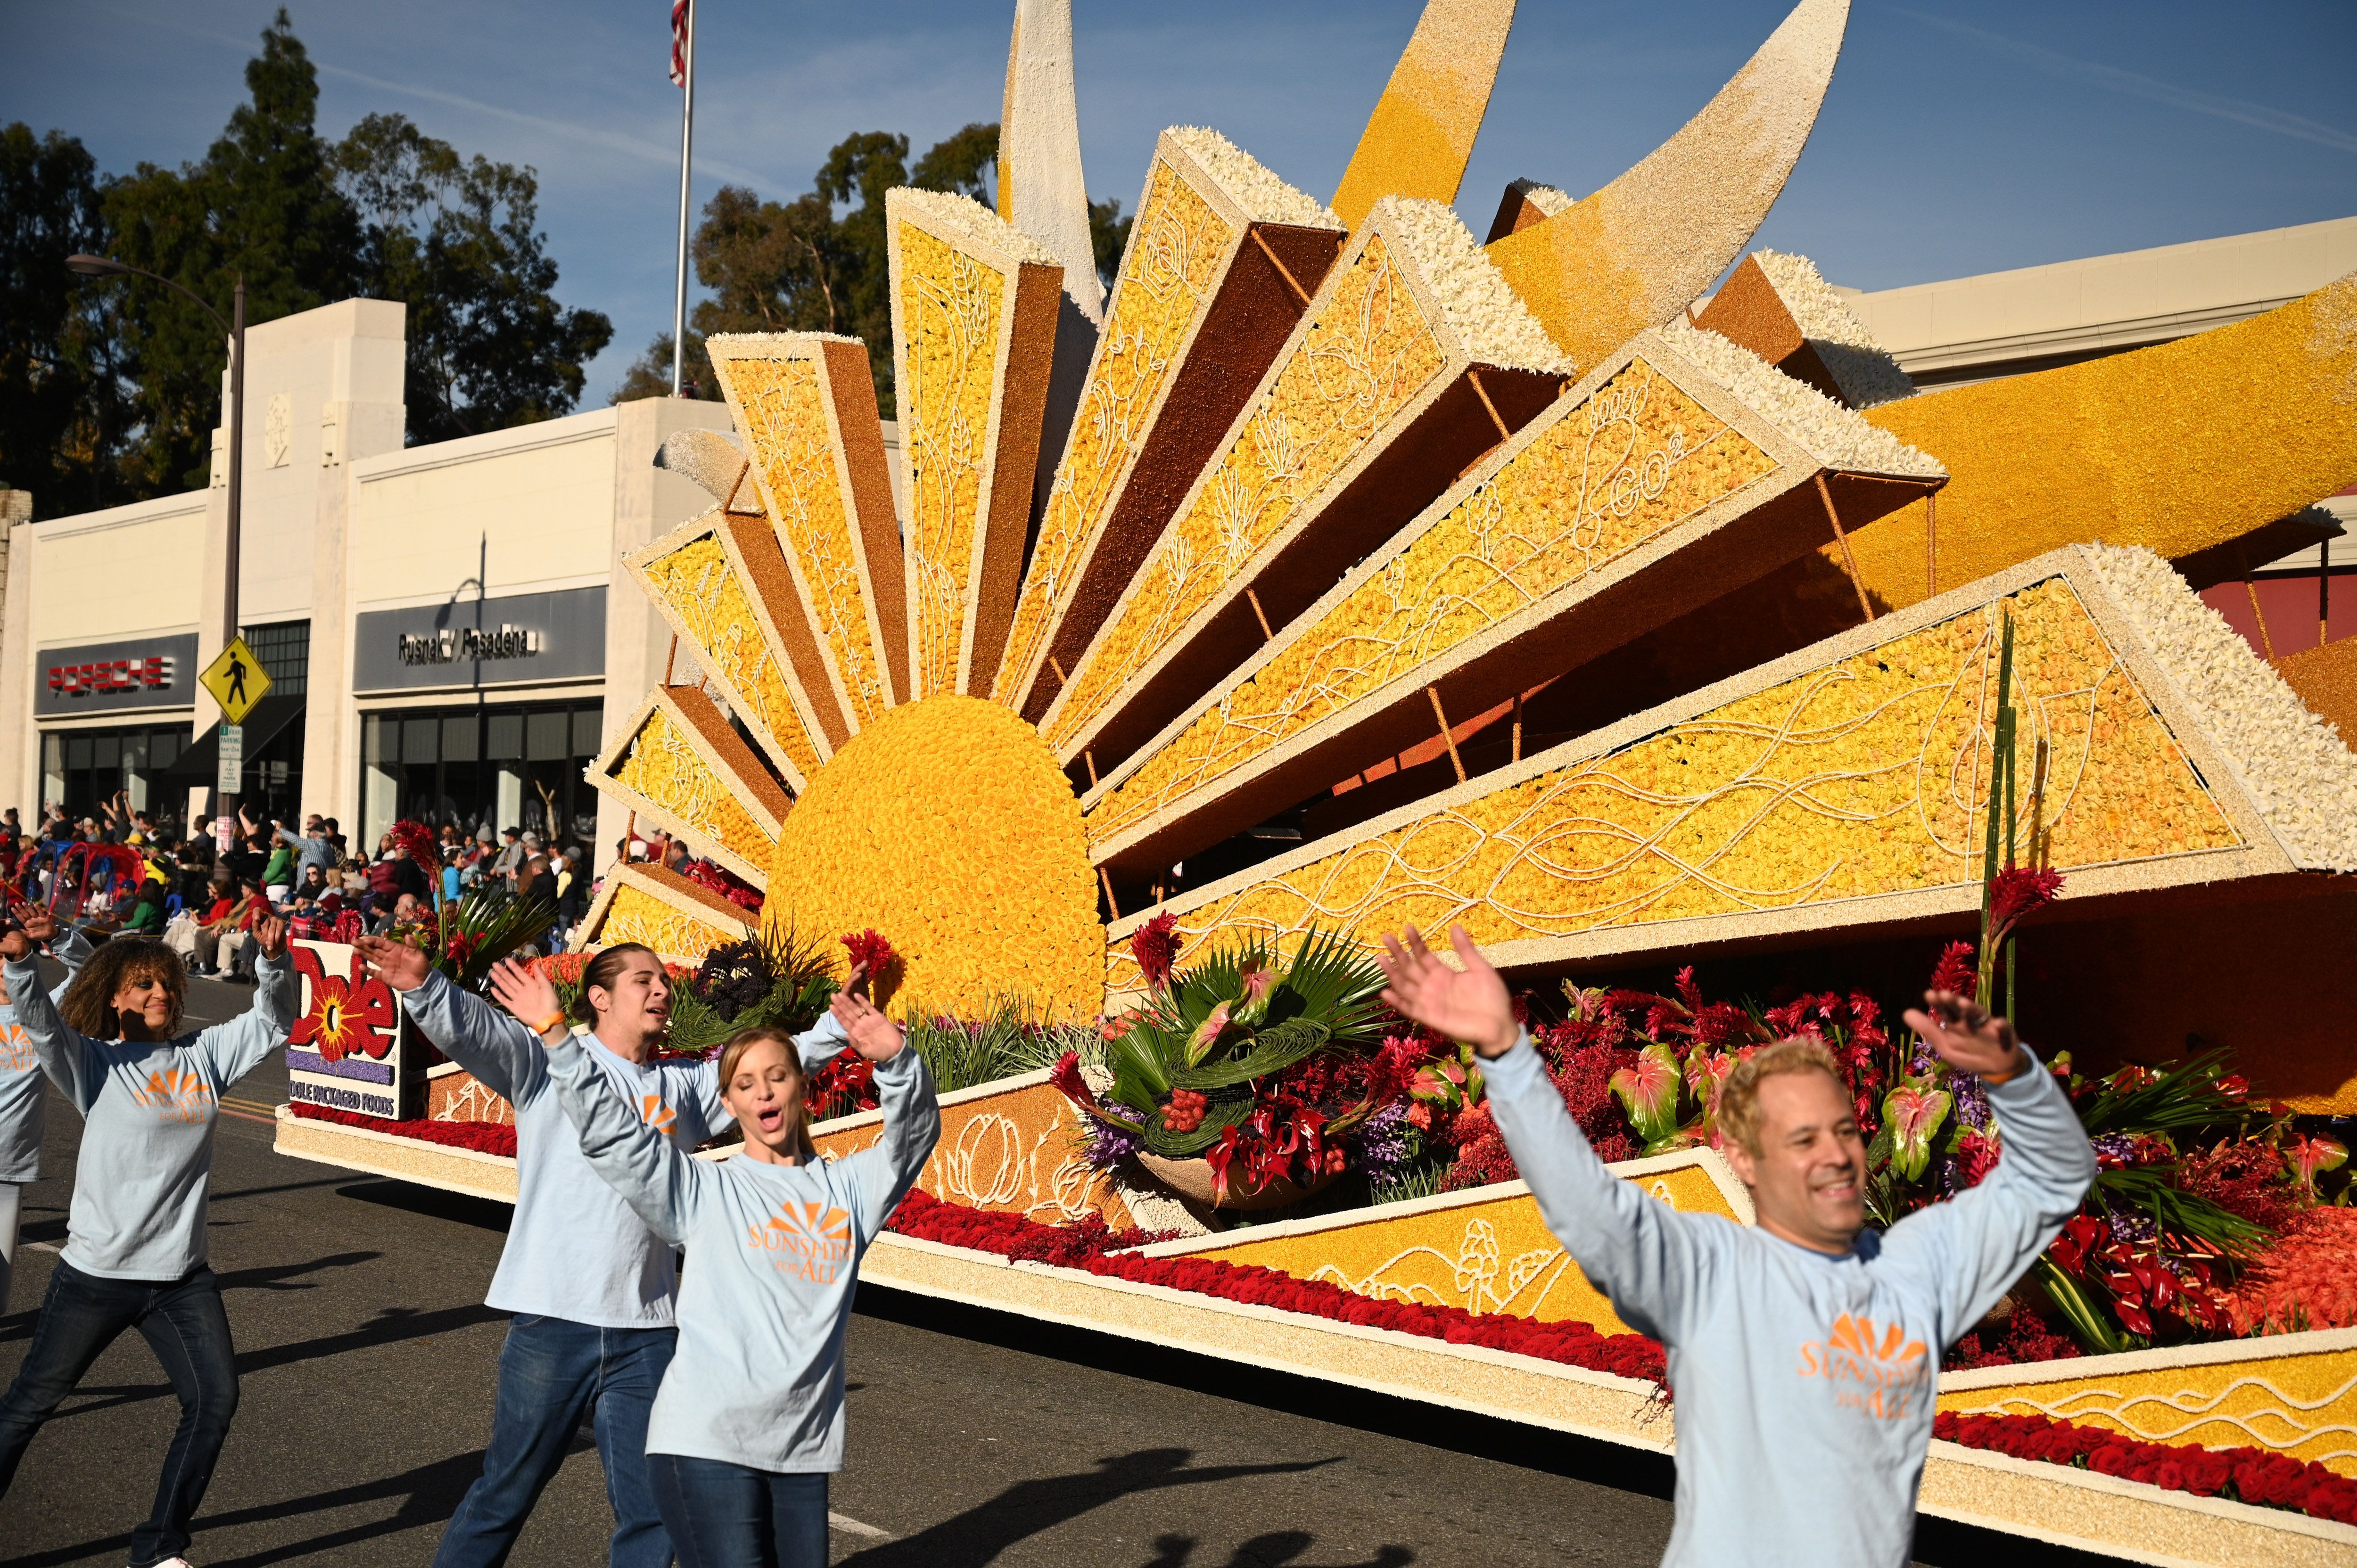 The Dole Packaged Foods float "Sunshine for All" participates in the 131st Rose Parade in Pasadena on January 1, 2020. (ROBYN BECK/AFP via Getty Images)